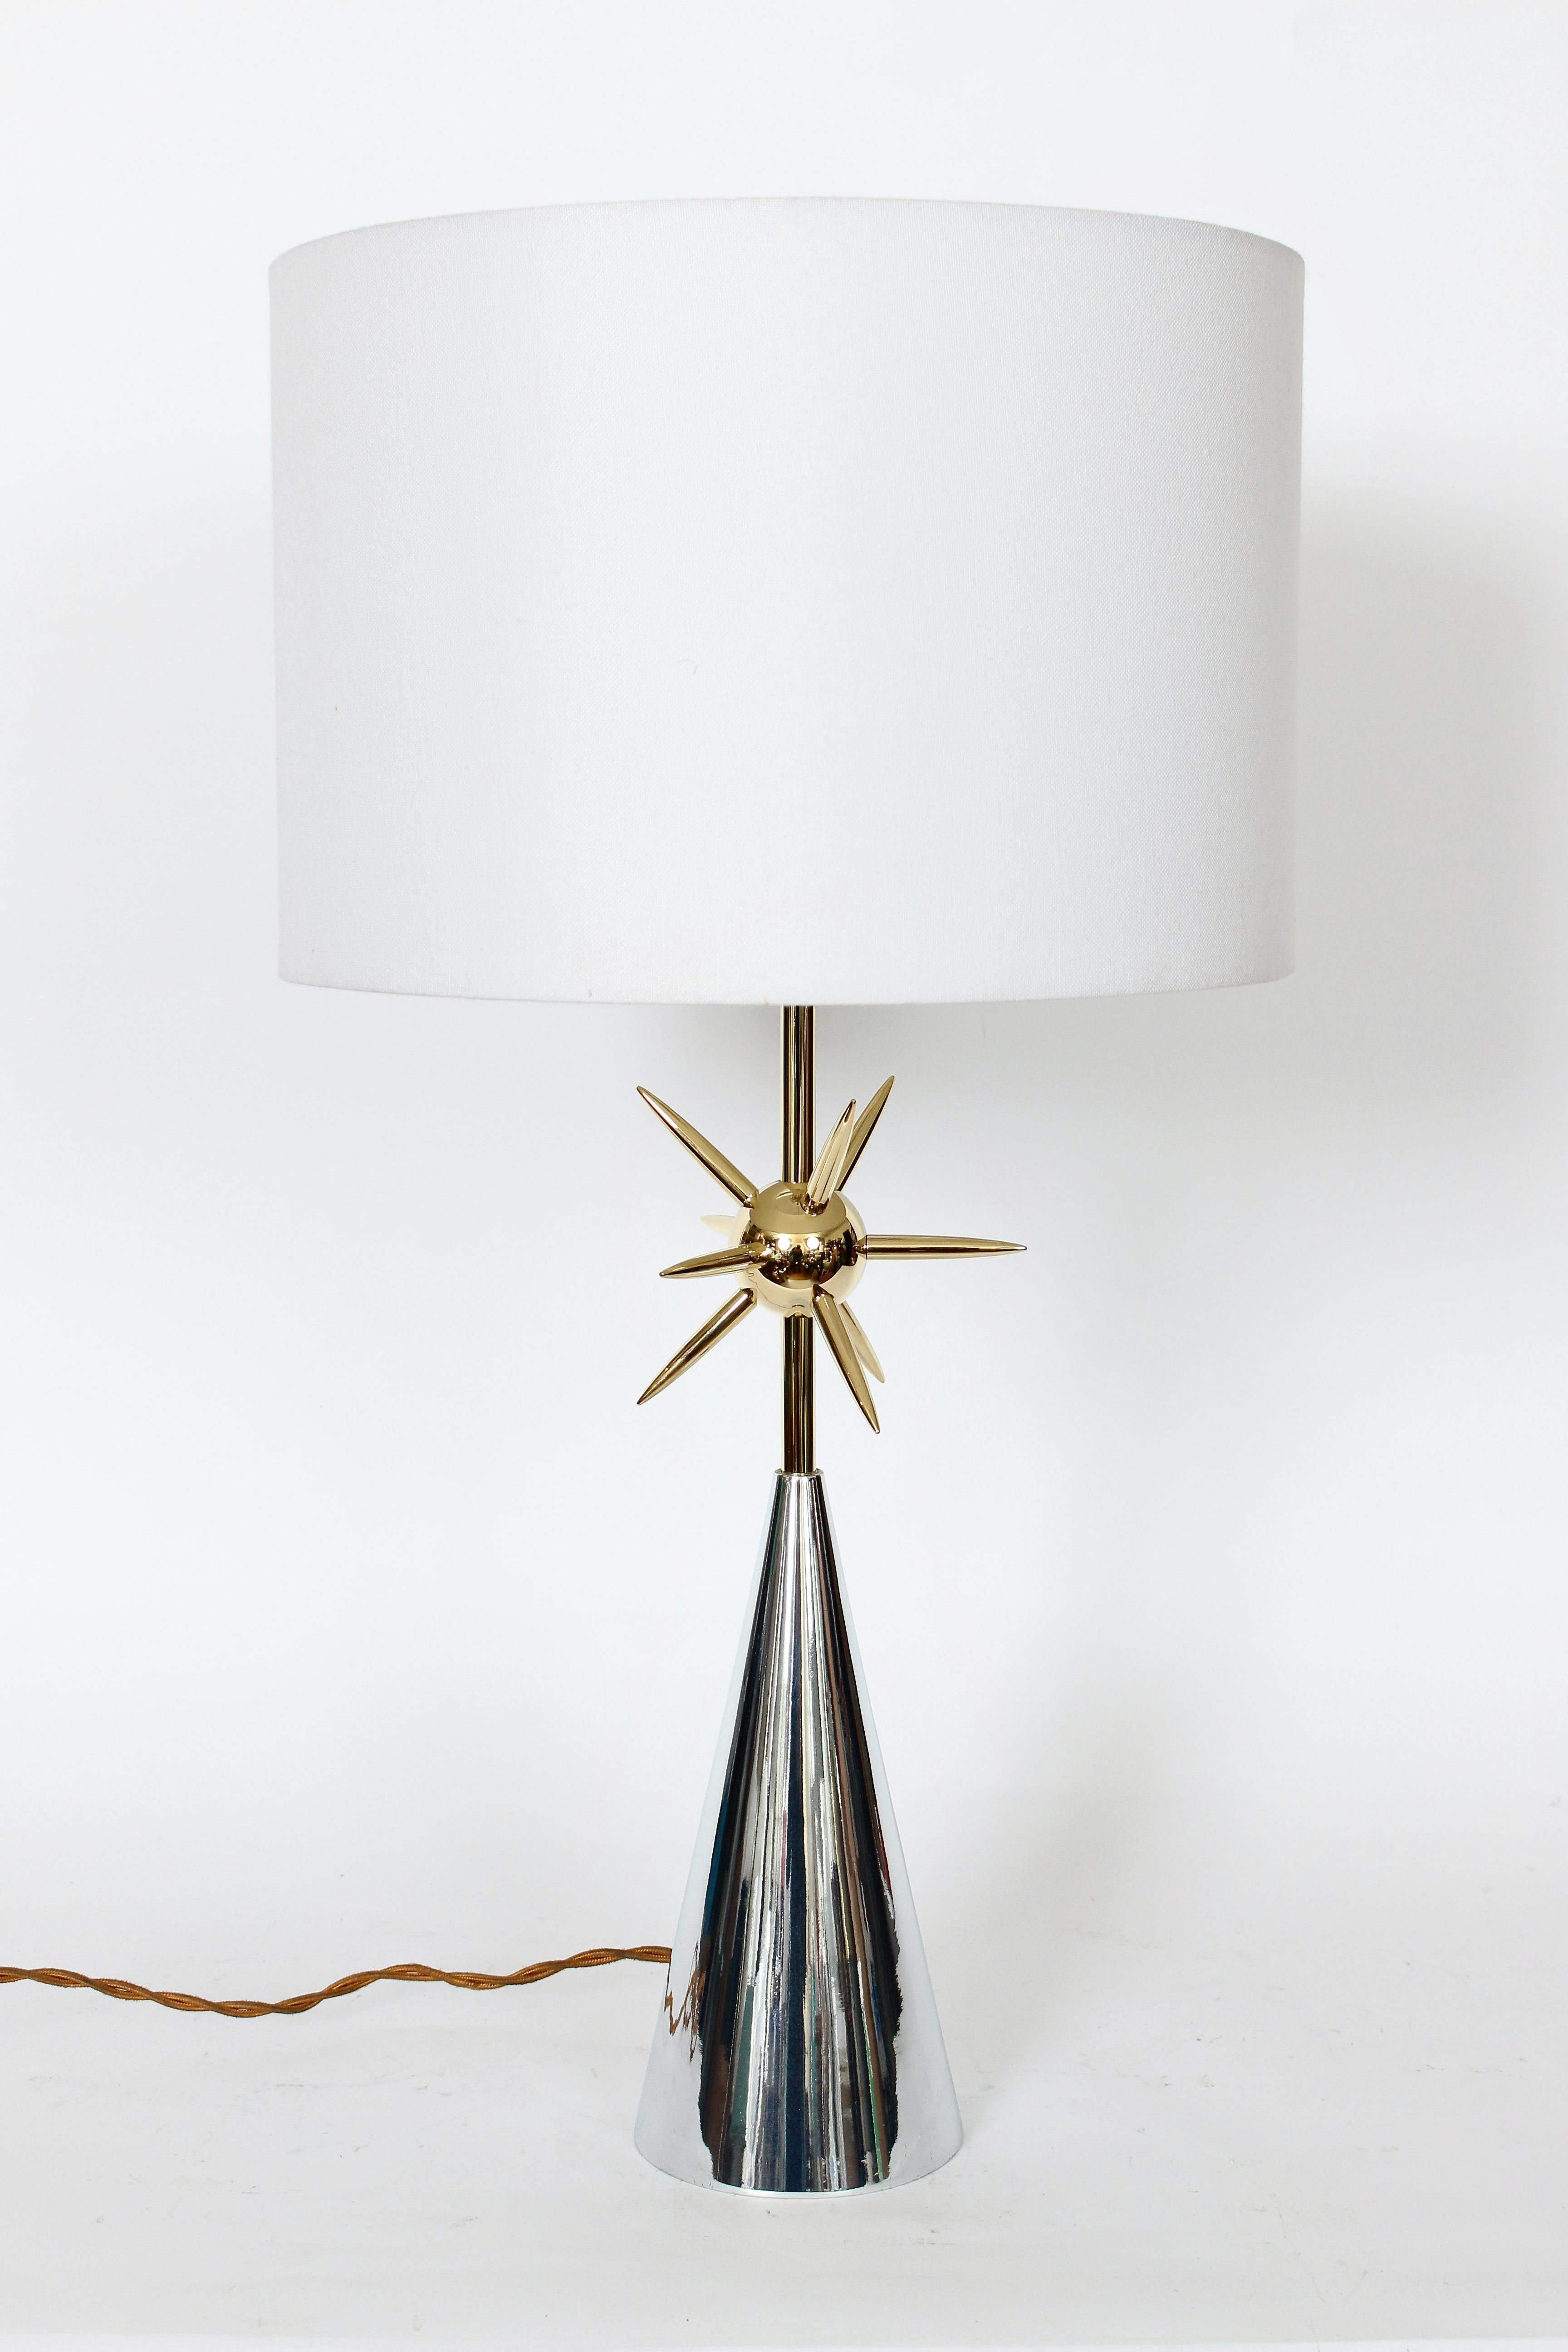 American Vintage Mutual Sunset Lamp Co. Atomic Sputnik Polished Metals Table Lamp, 1950's For Sale